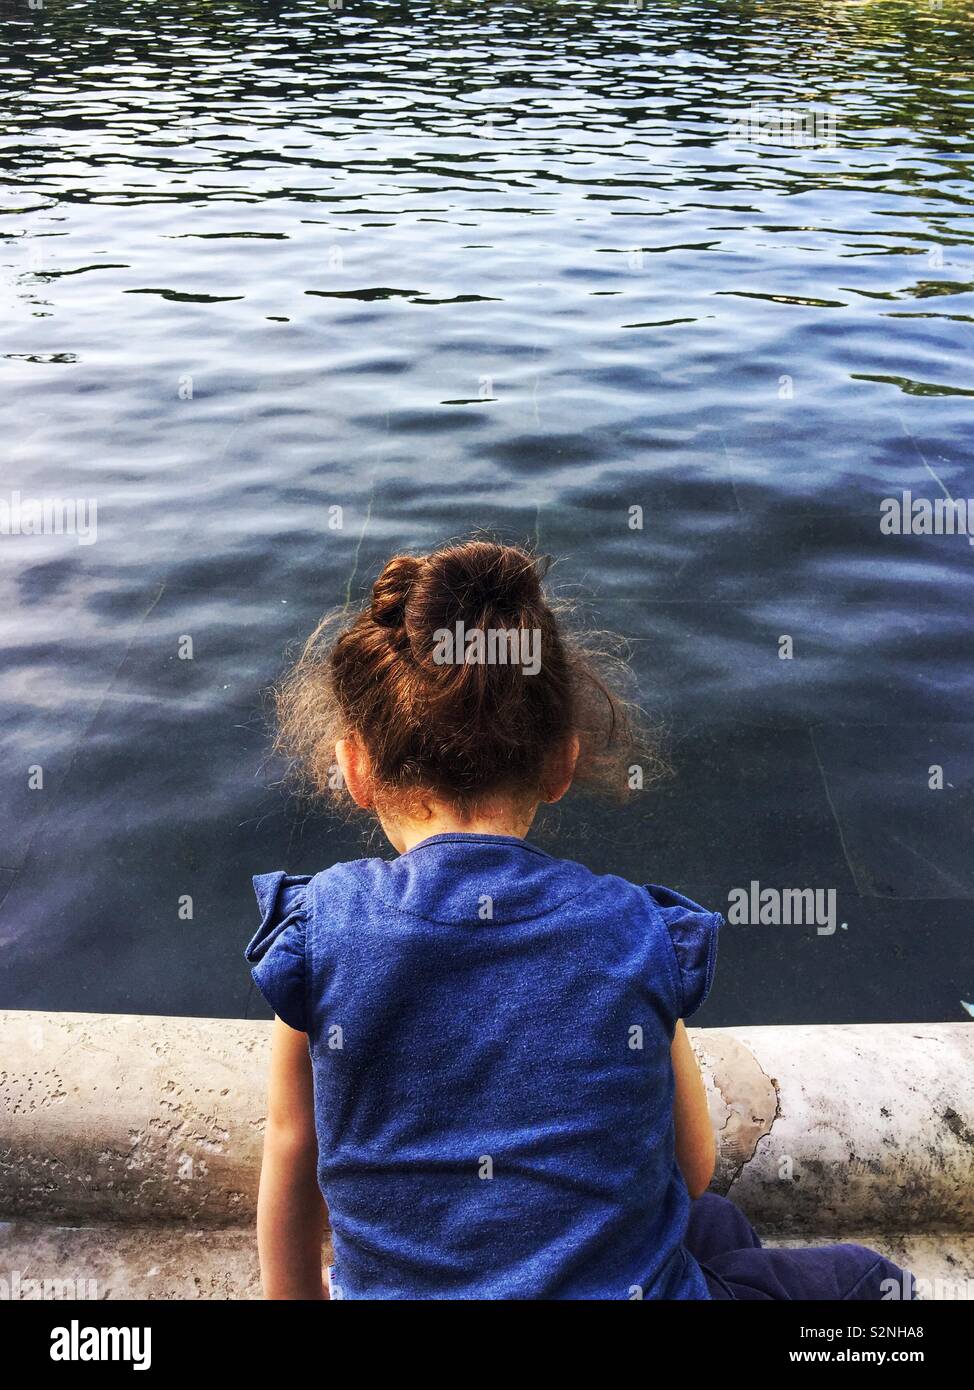 Rear view of little girl by the water Stock Photo